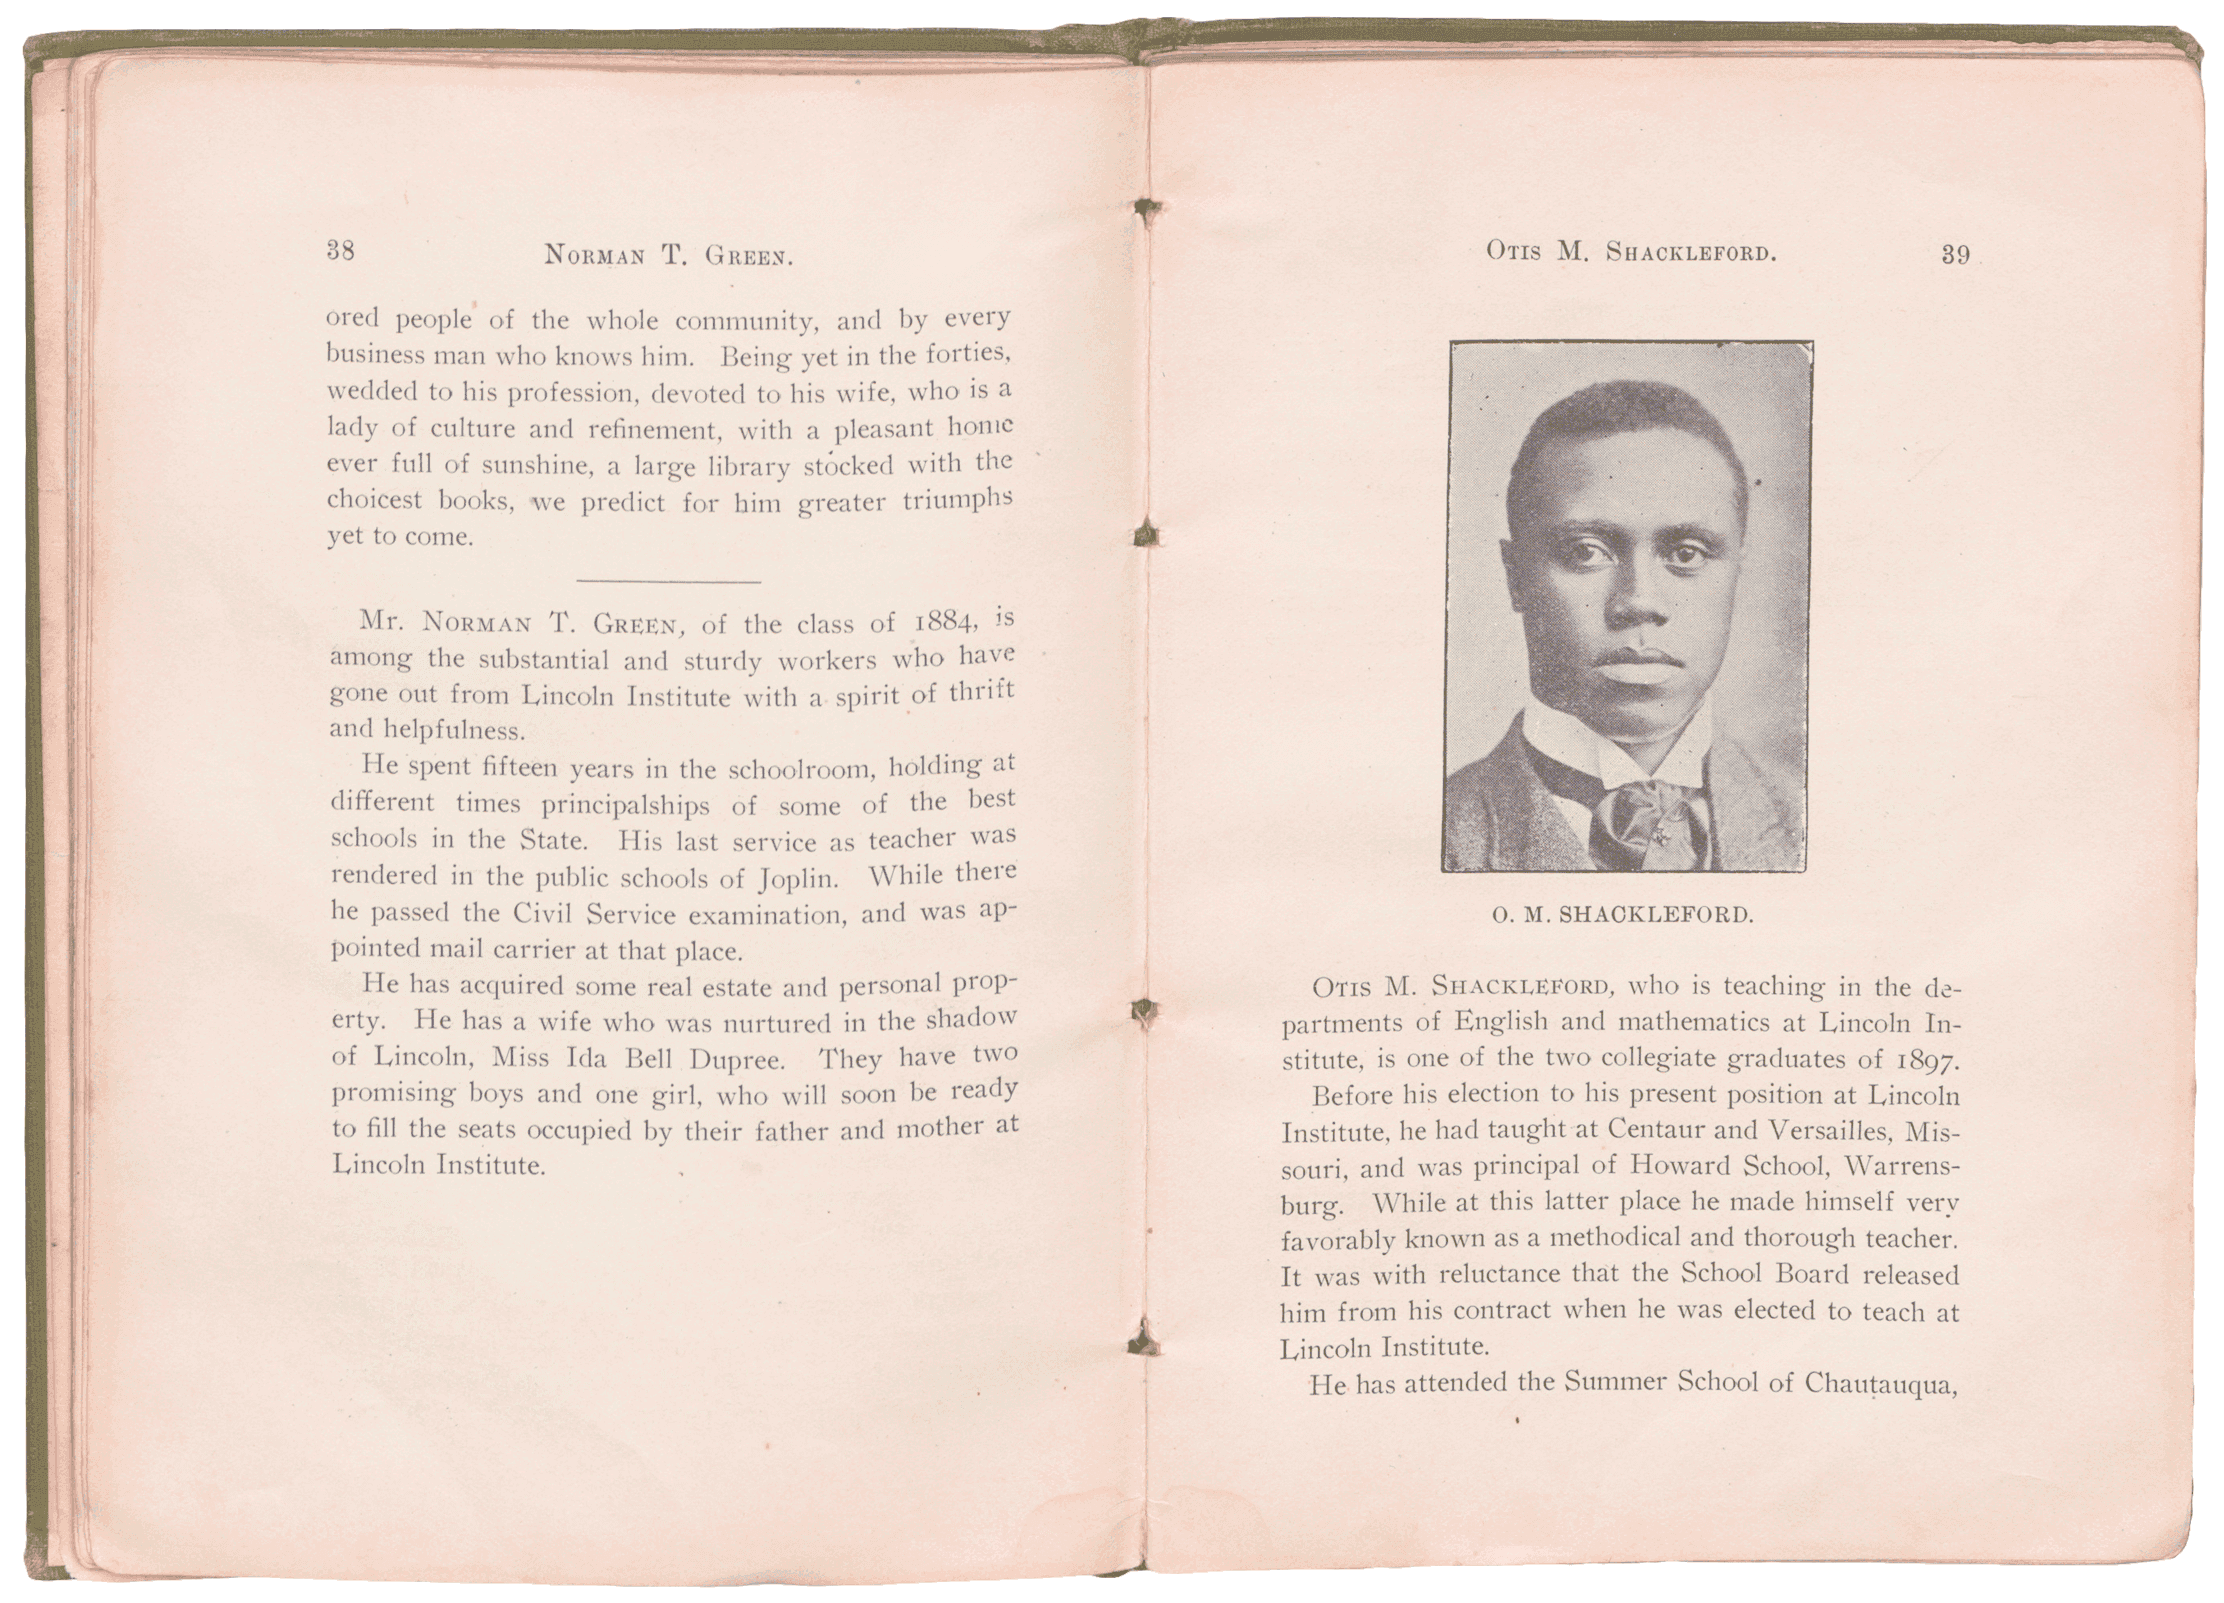 An open book detailing two graduates, Norman T. Green and Ottis M. Shackleford, of Lincoln Institute.